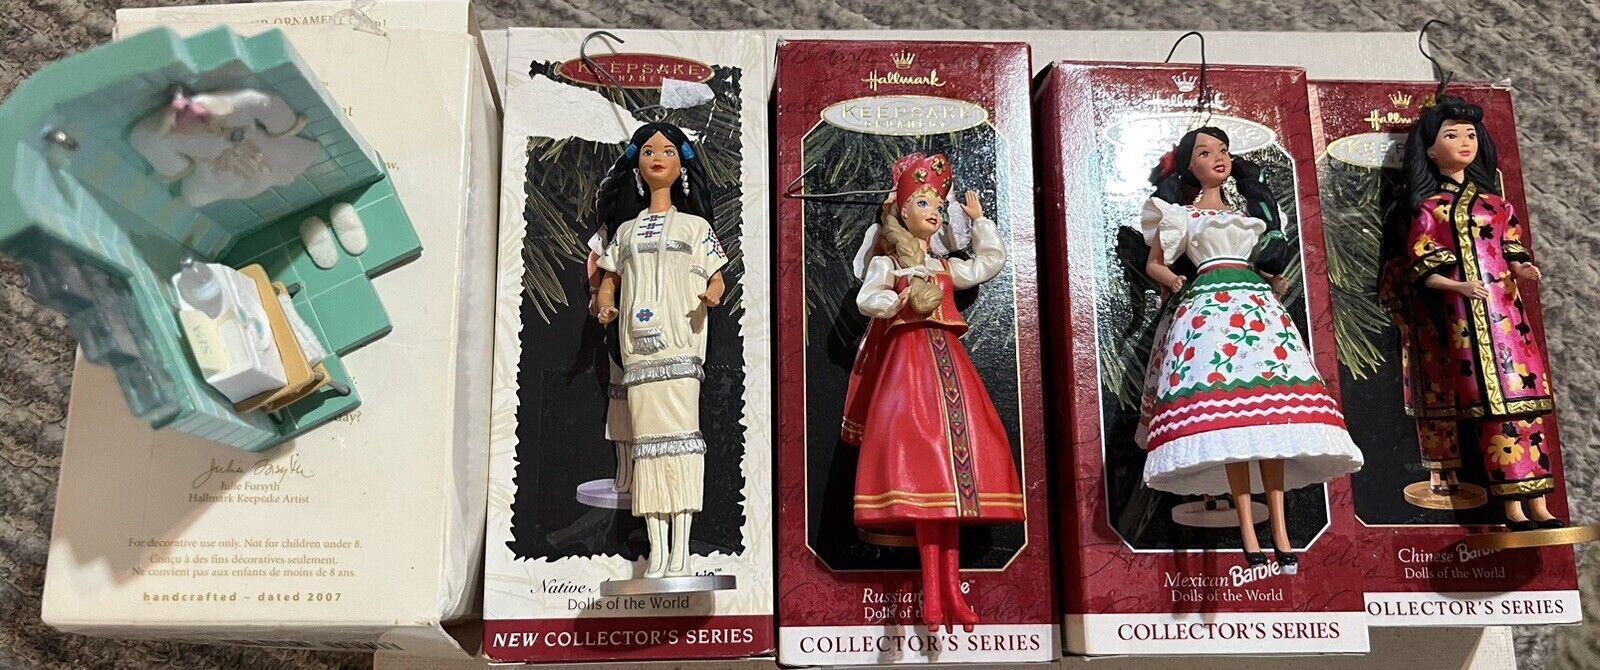 Hallmark Keepsake Ornaments Barbie Collectors Series Lot Of 5 With Boxes